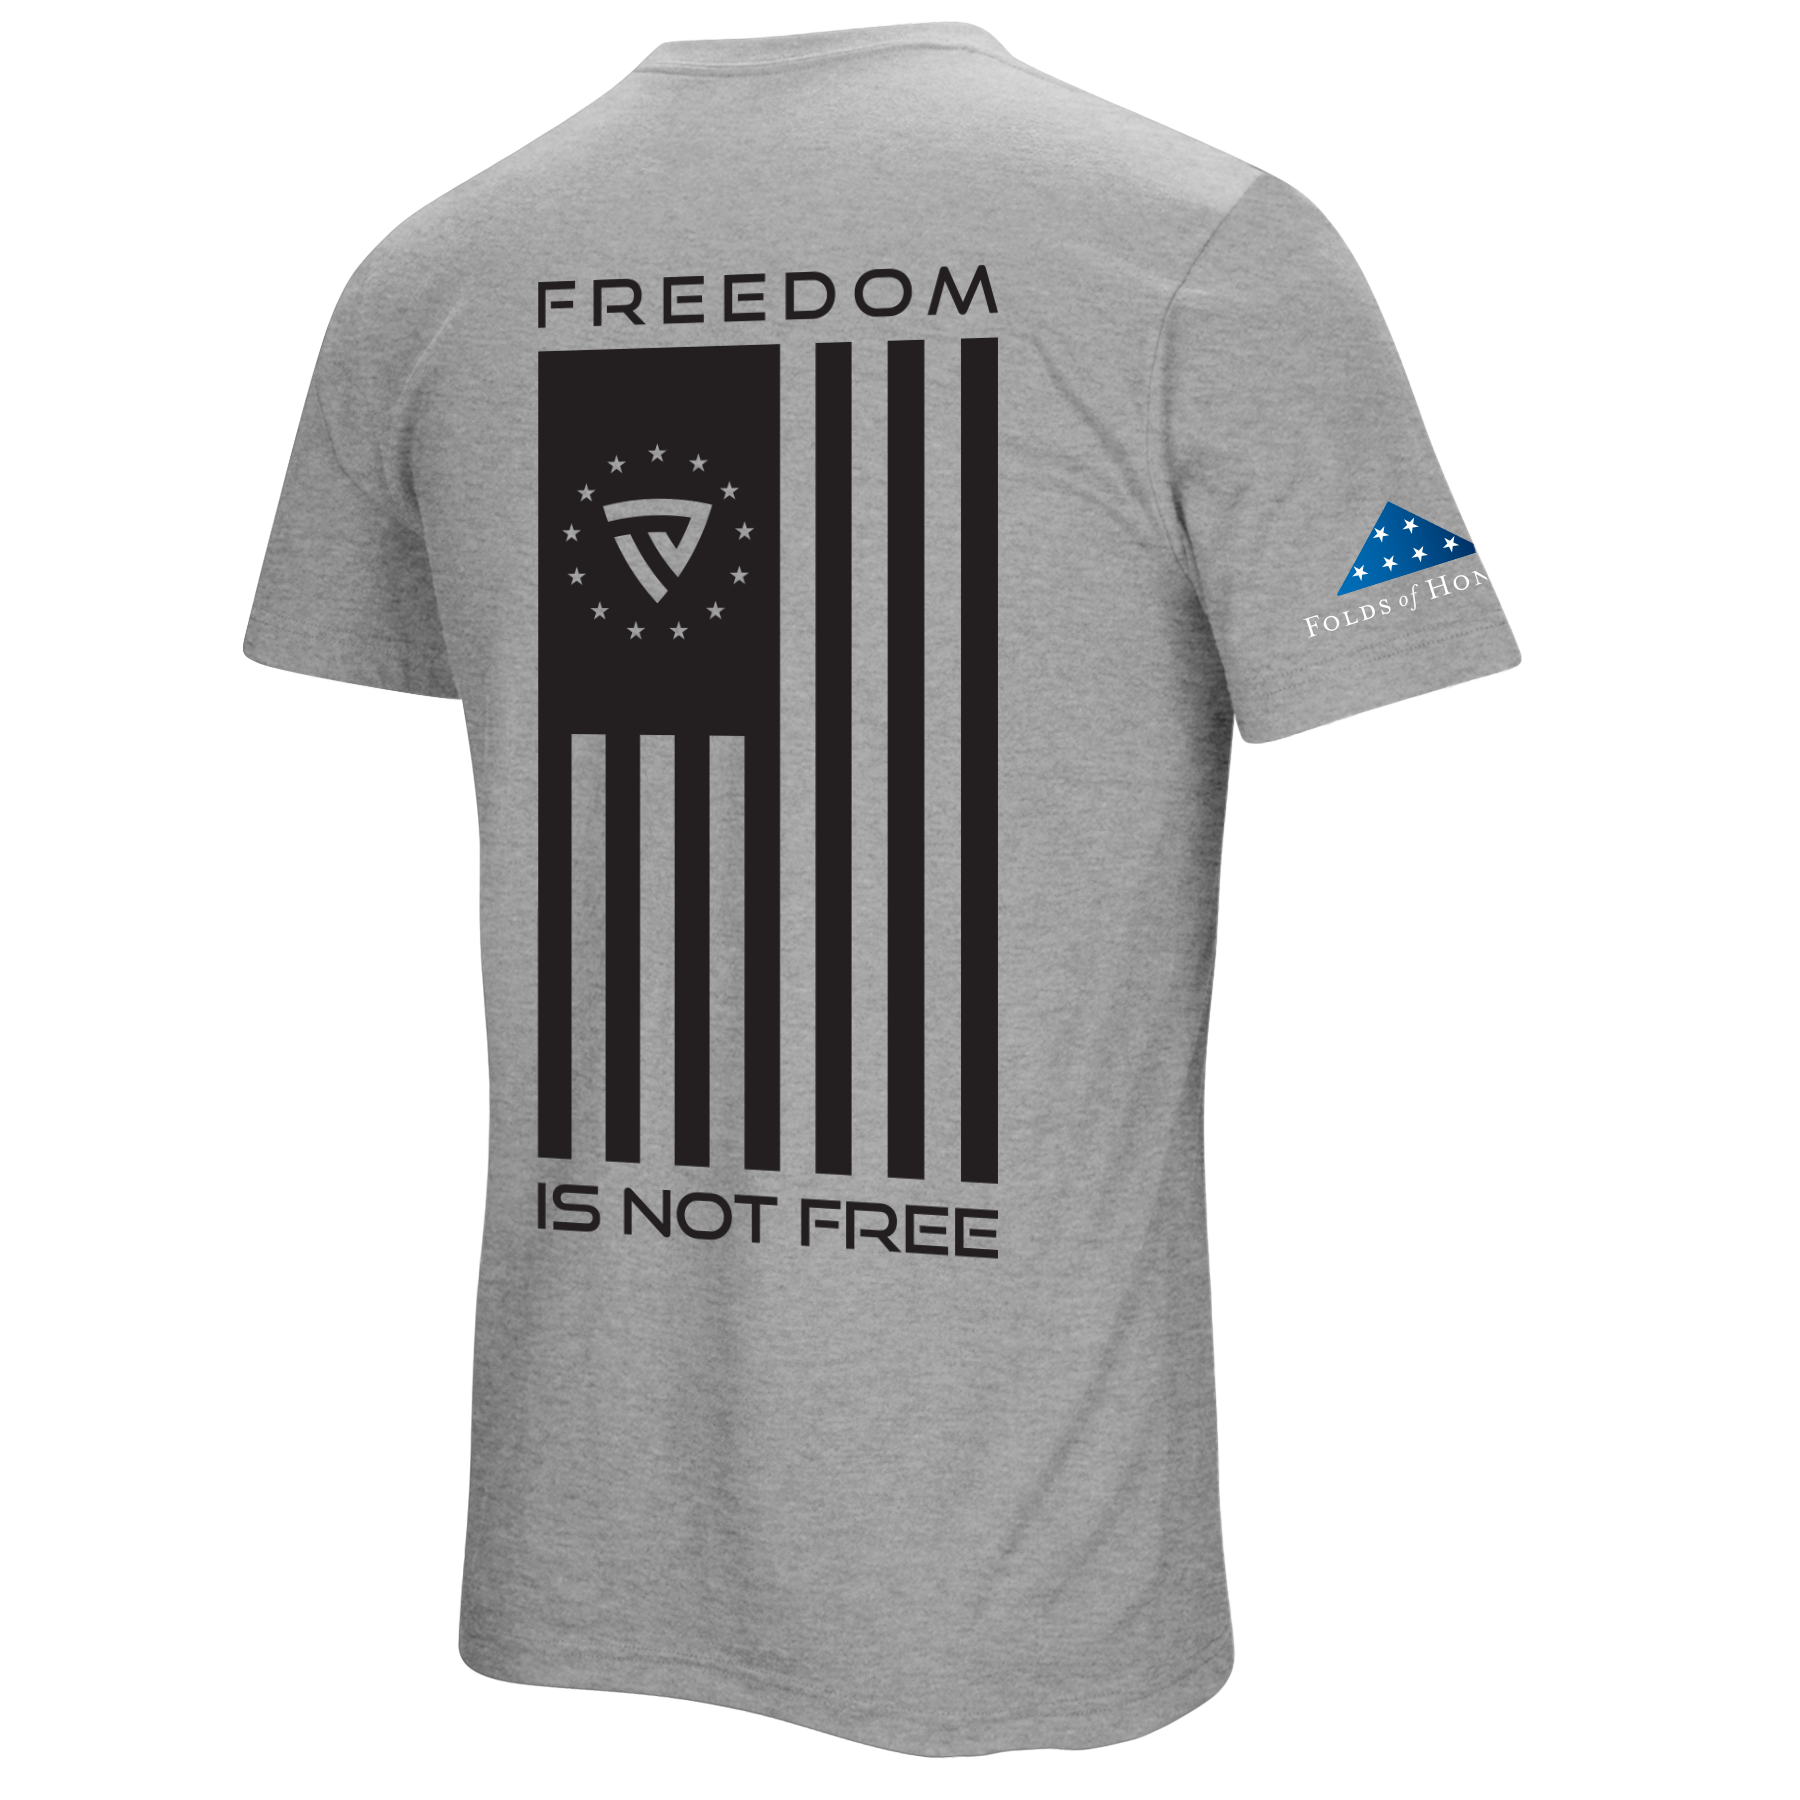 Men's Freedom is not Free X Folds of Honor Tee